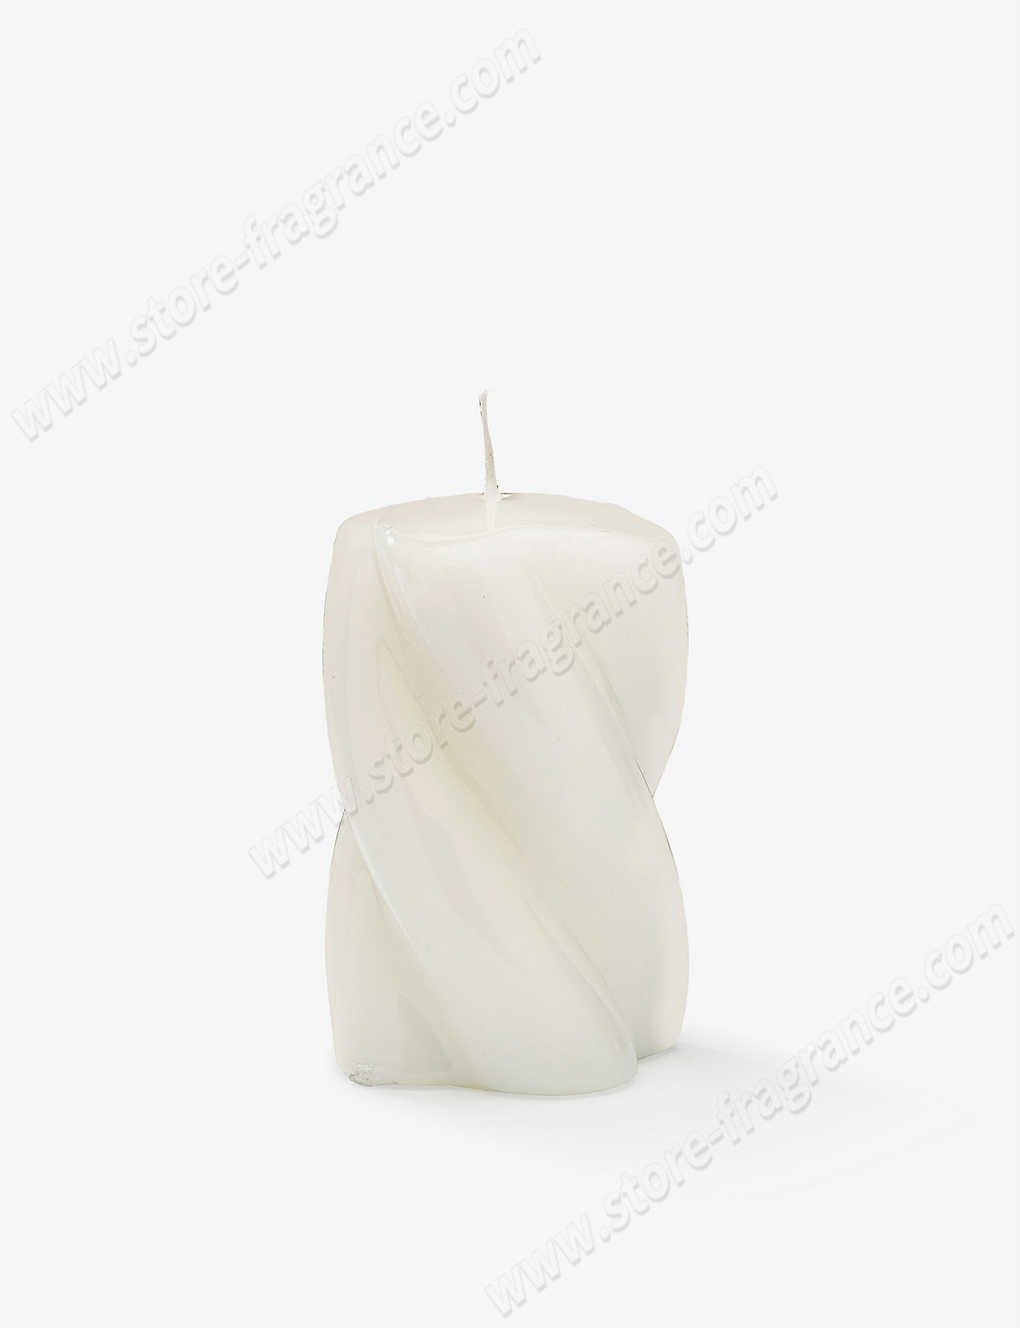 ANNA + NINA/Blunt twisted candle 10cm Limit Offer - ANNA + NINA/Blunt twisted candle 10cm Limit Offer